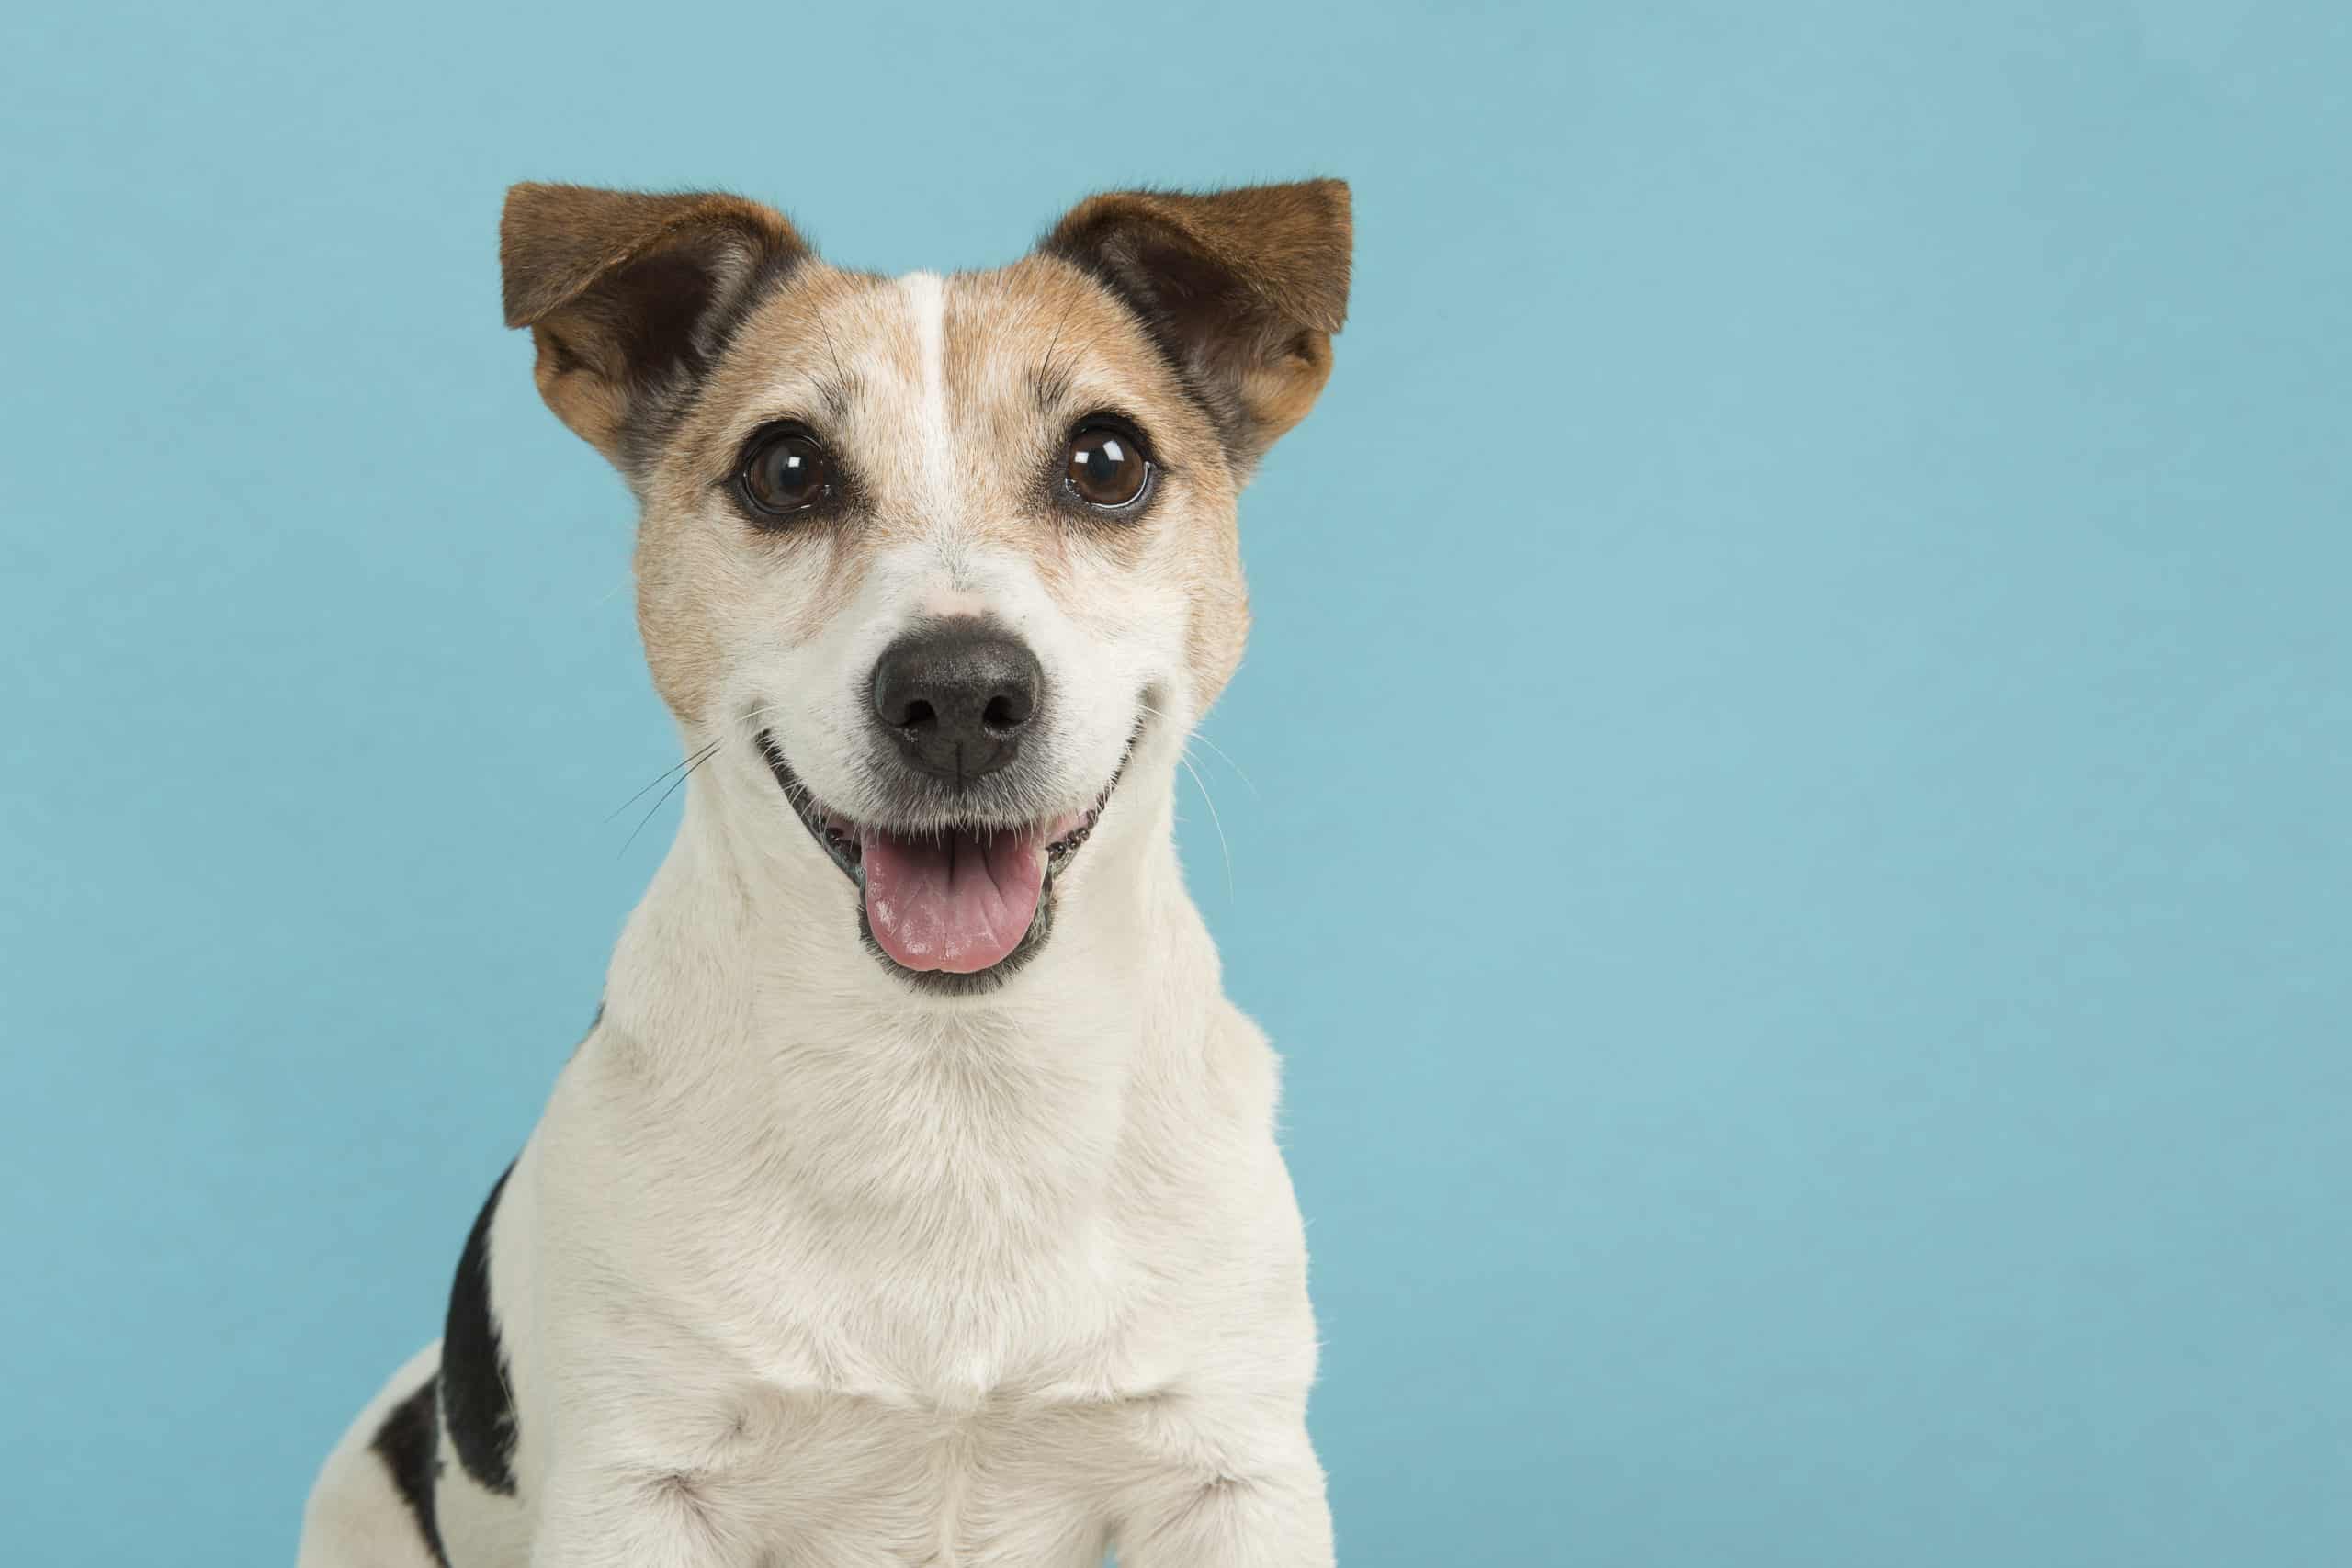 Portrait of a cute smiling Jack Russell terrier dog seen from the front on a blue background